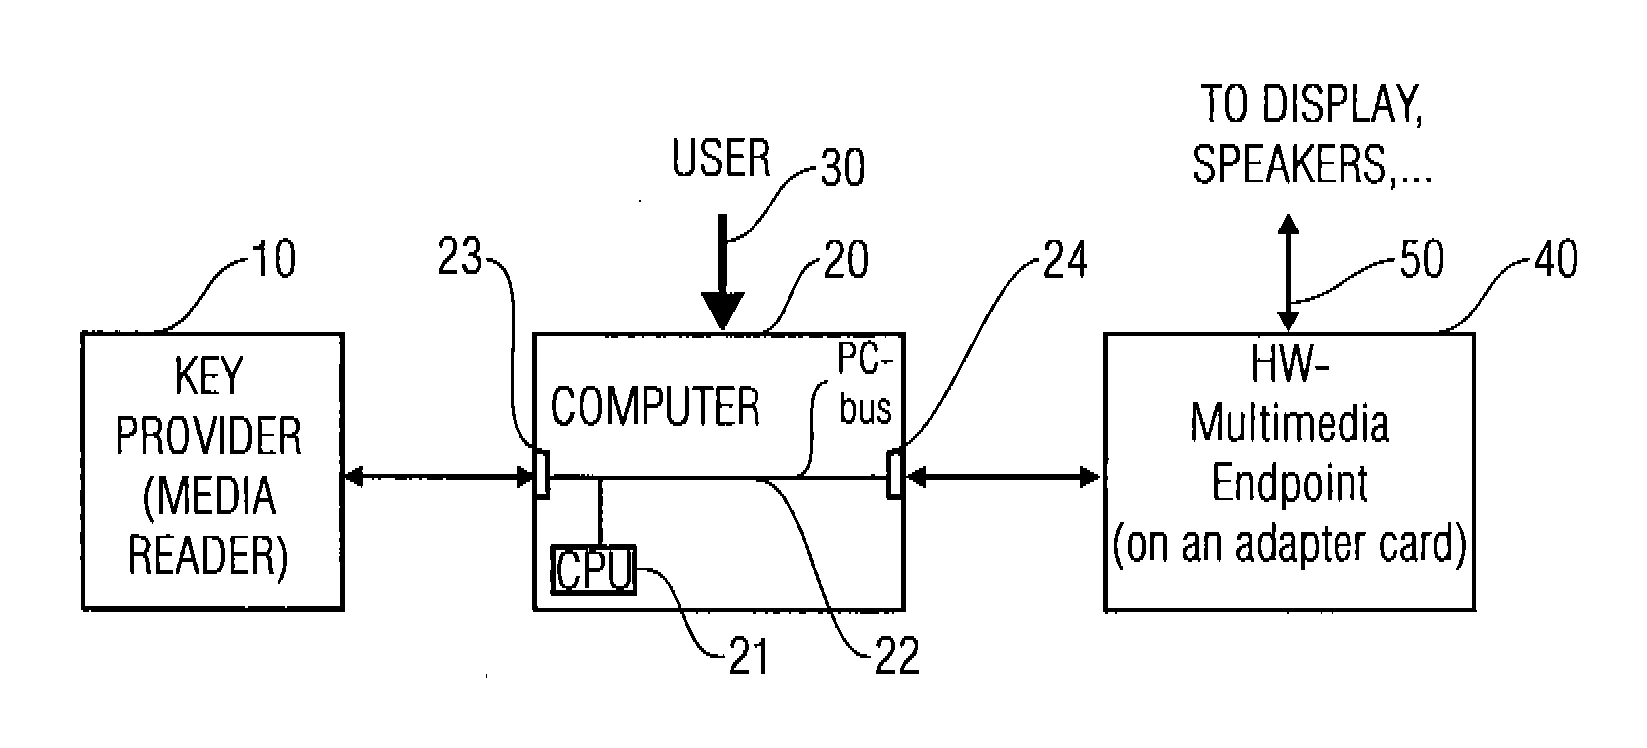 Hardware Multimedia Endpoint and Personal Computer